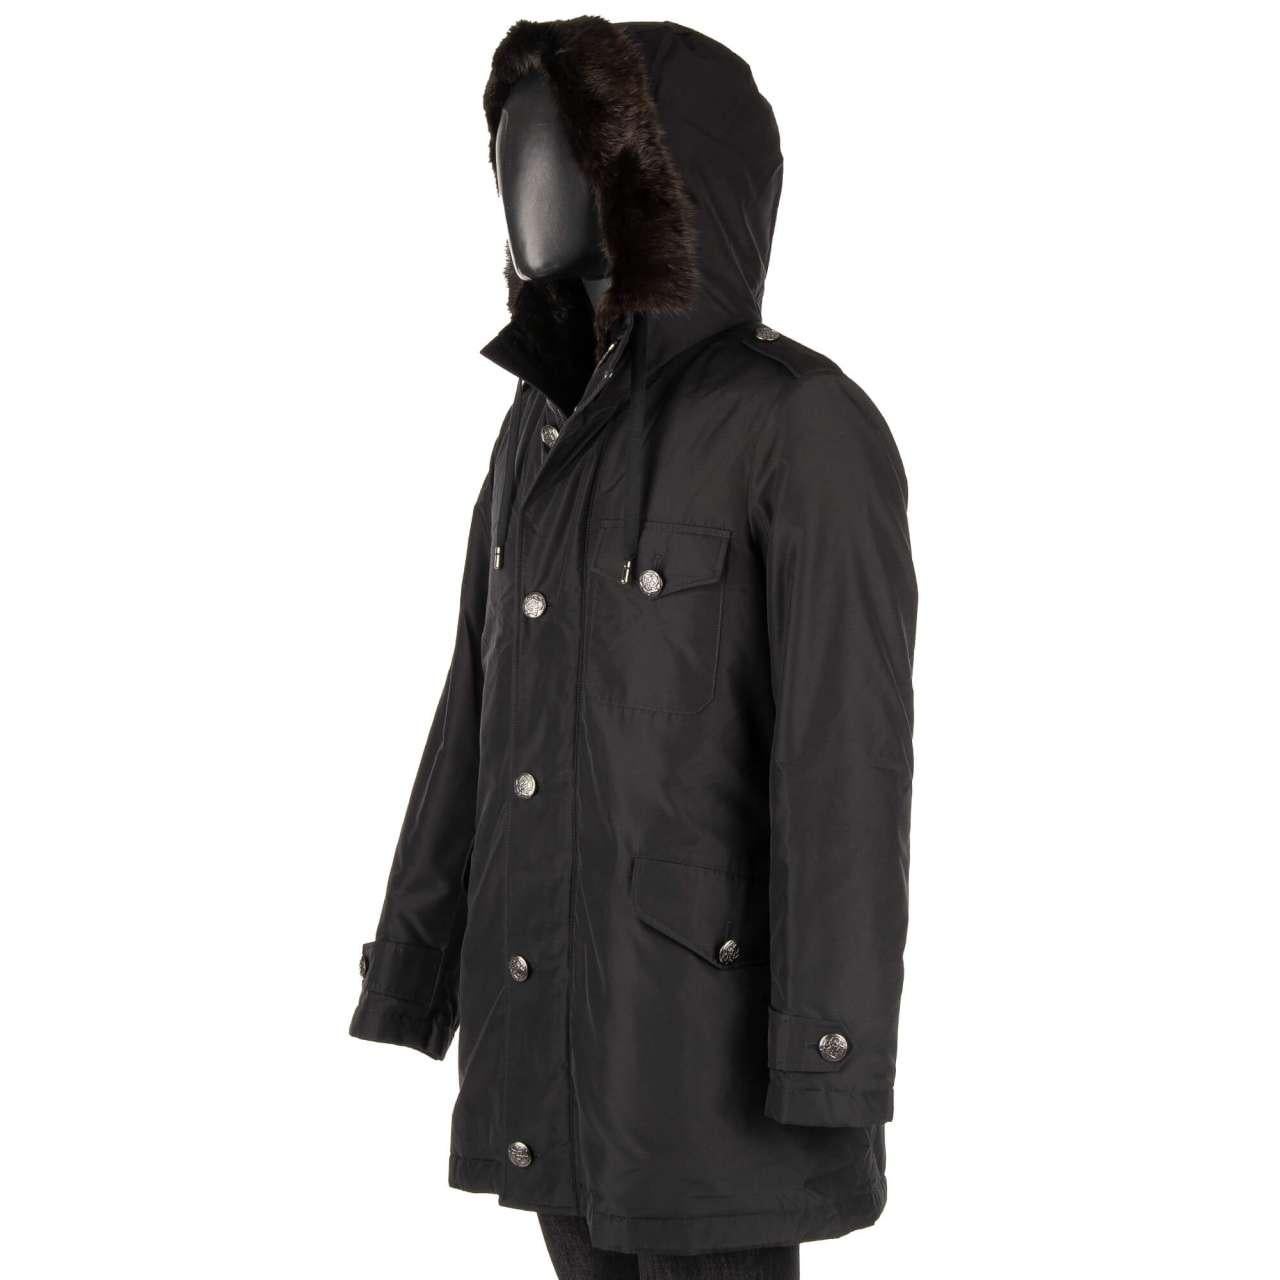 Dolce & Gabbana Silk Parka Jacket with Detachable Fur Lining and Hoody Black 54 For Sale 3